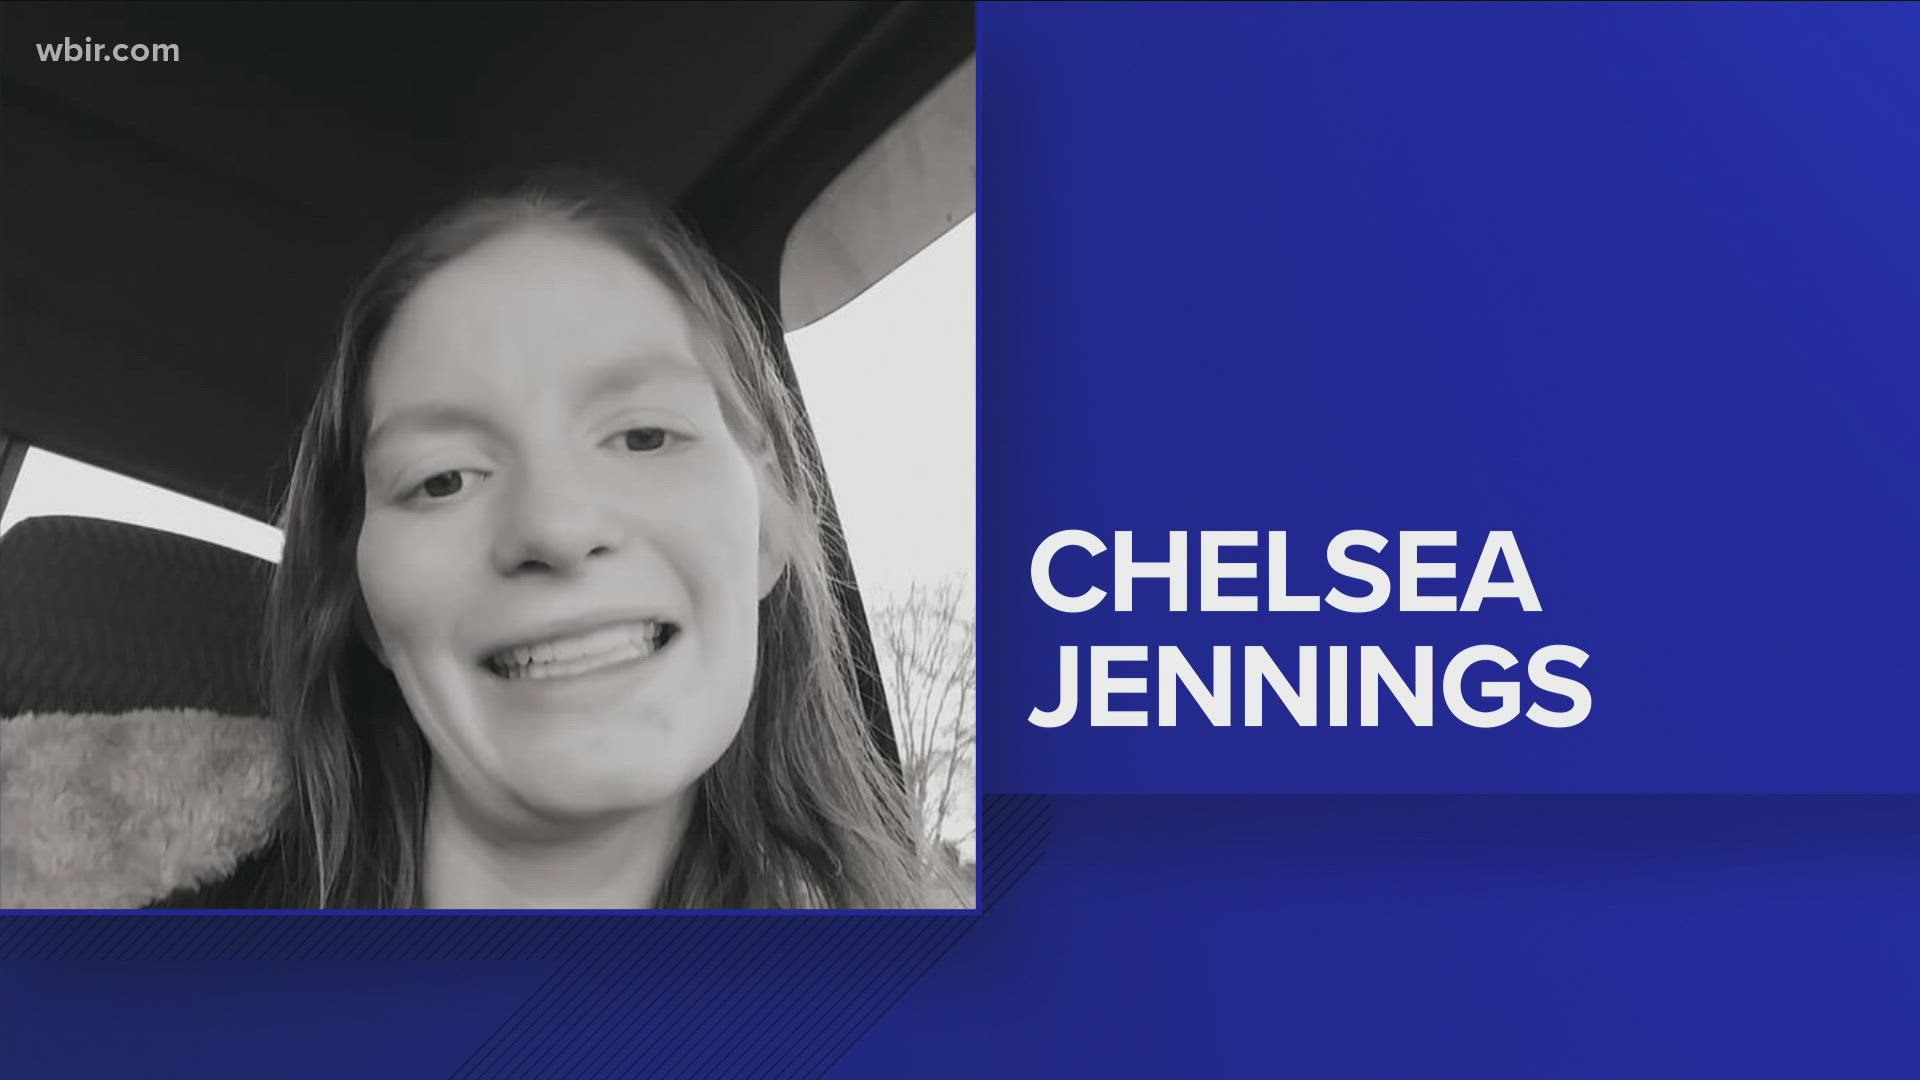 KPD said Jennings was confirmed to be safe on Tuesday weeks after being reported missing.